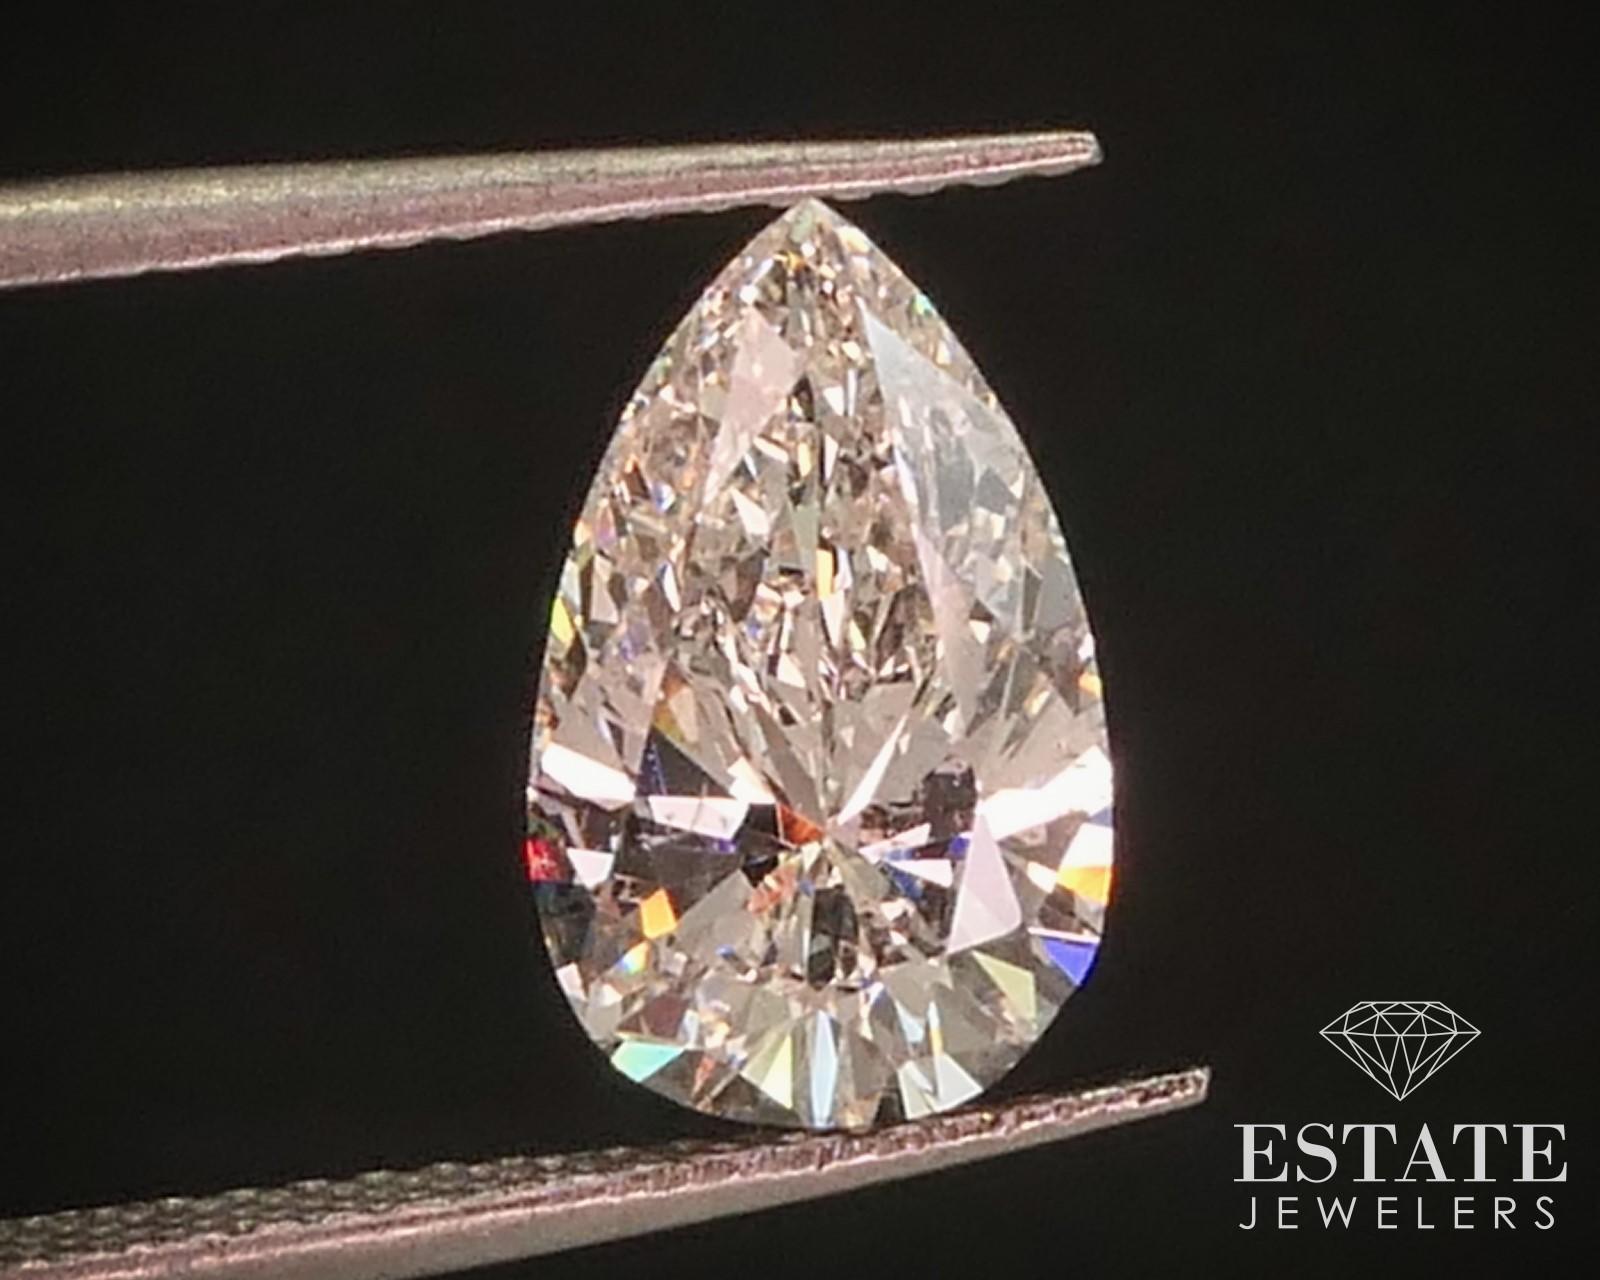 Sparkling loose diamond. SI1 clarity with J color. GIA number 6237154289. 10.7mm by 6.6mm by 4.2mm